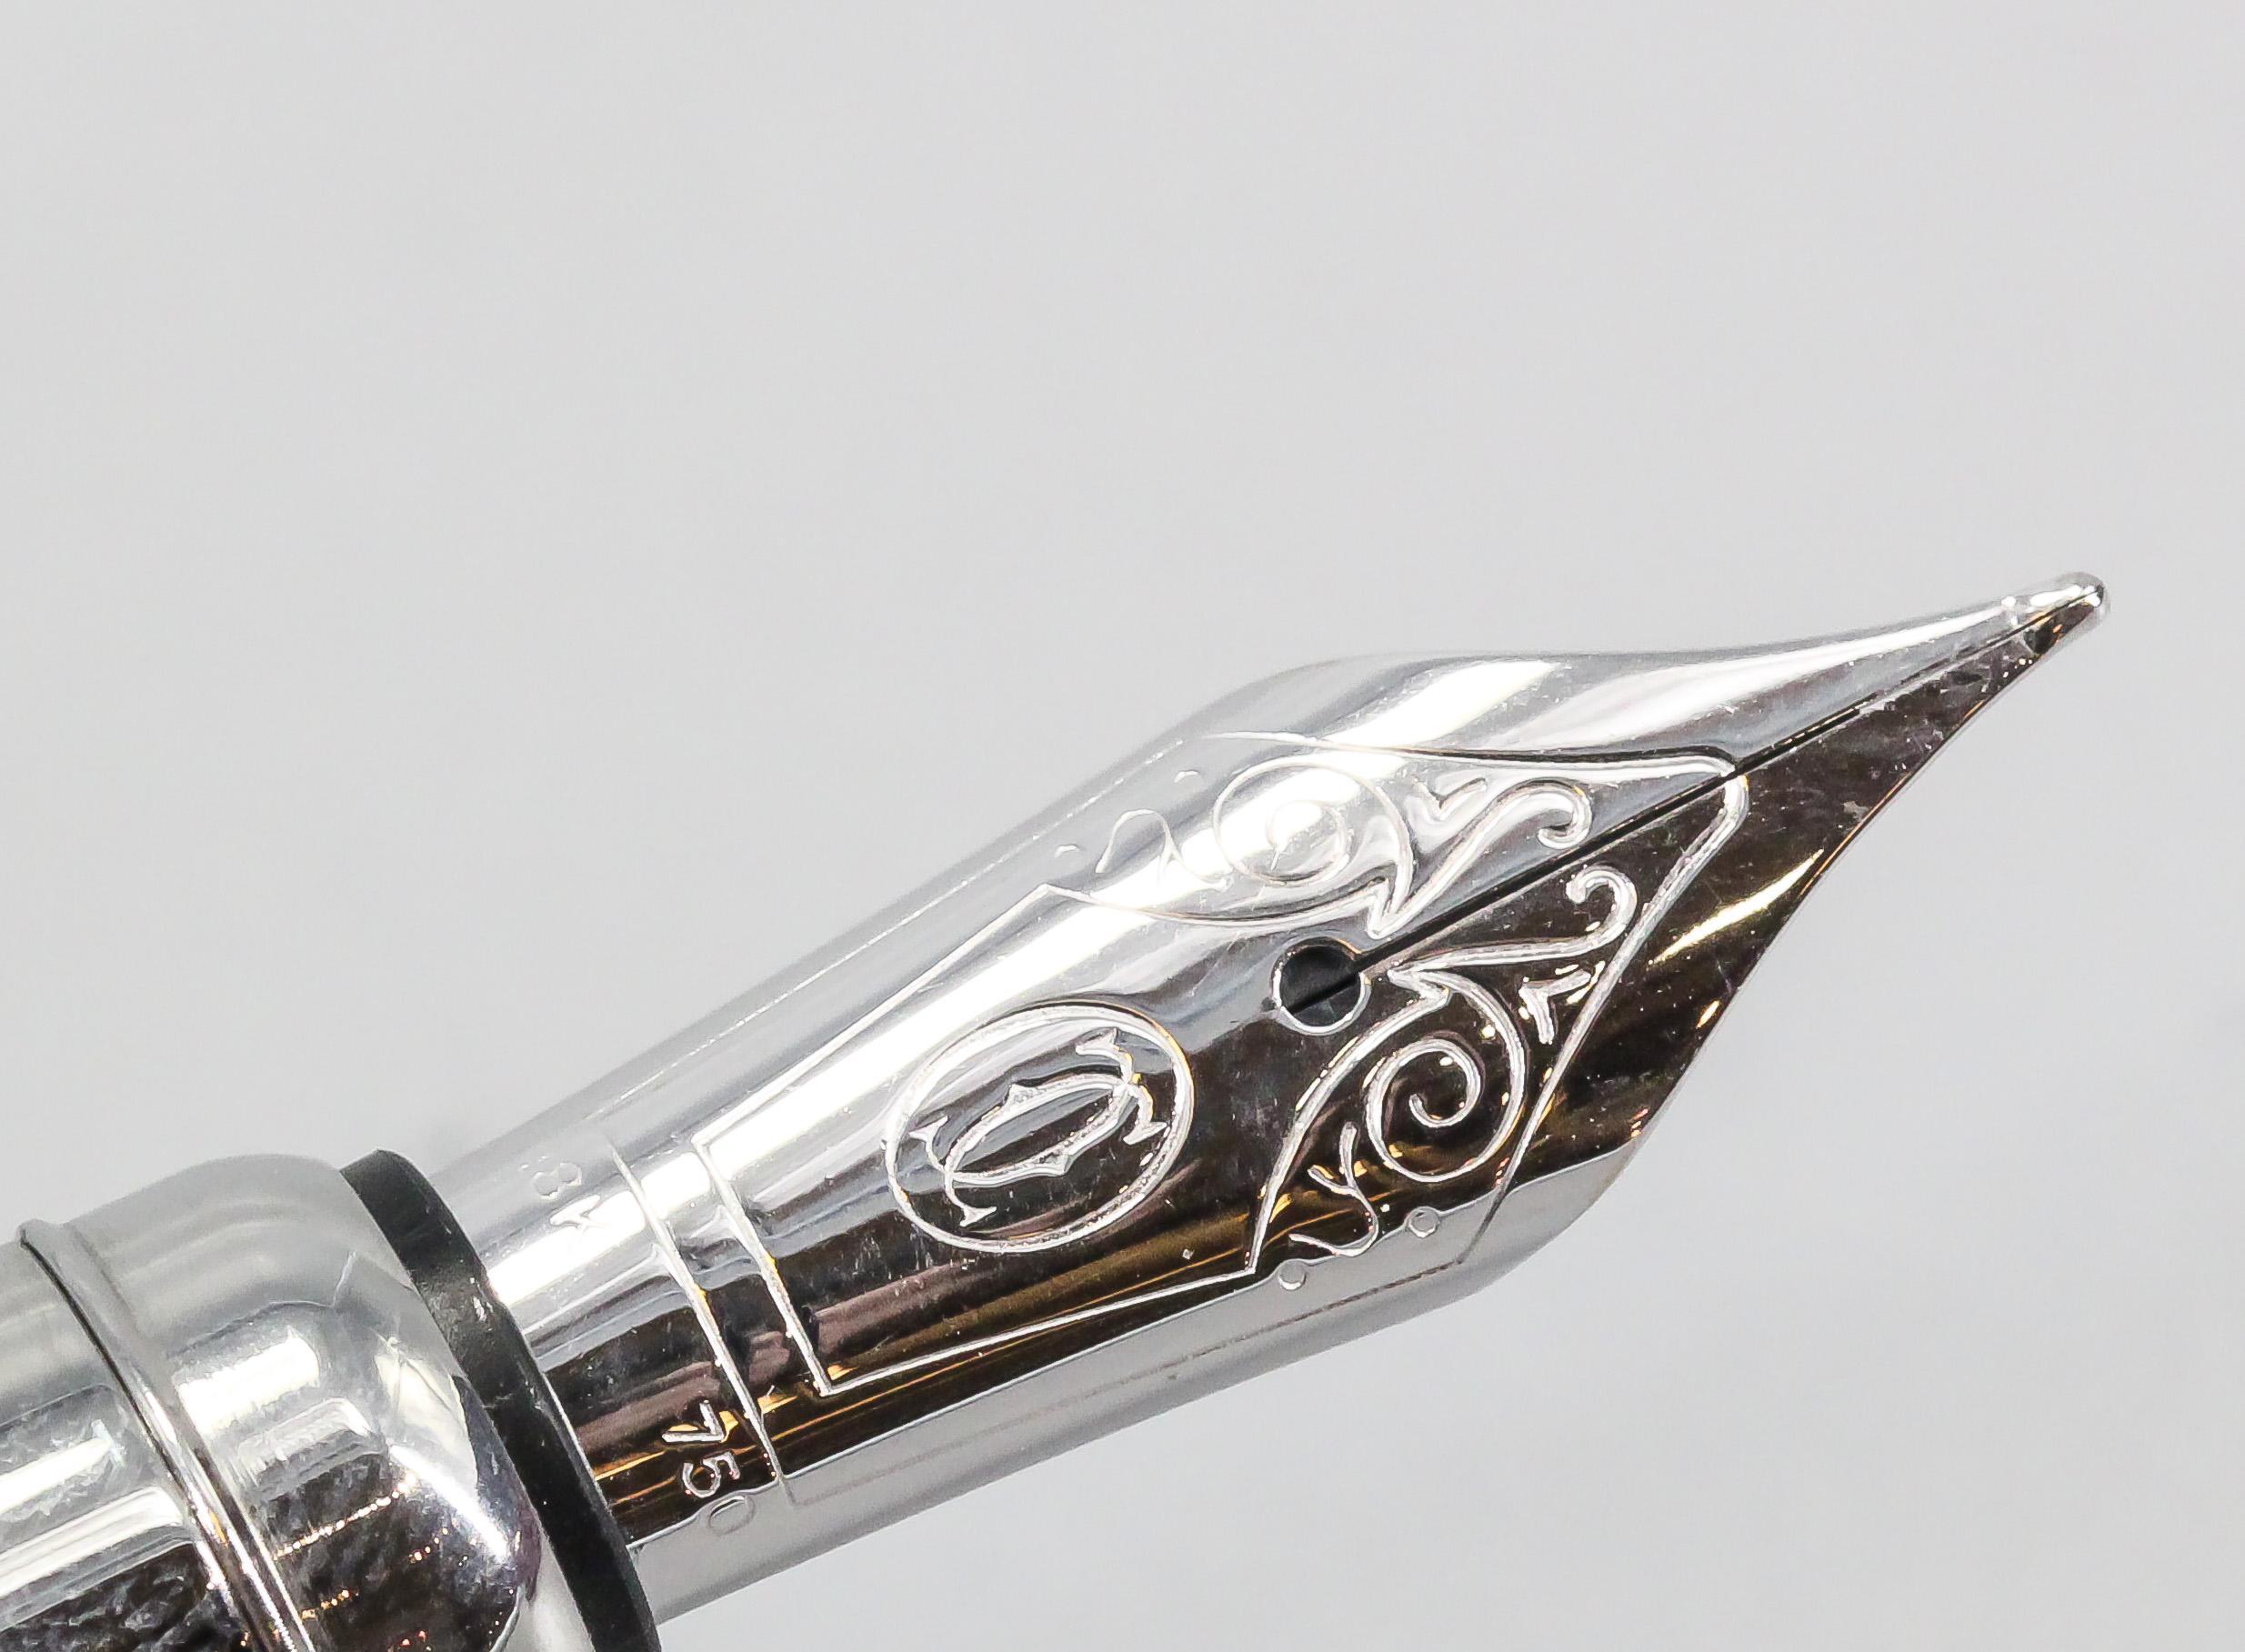 Cartier Limited Edition Fountain Pen Watch 1